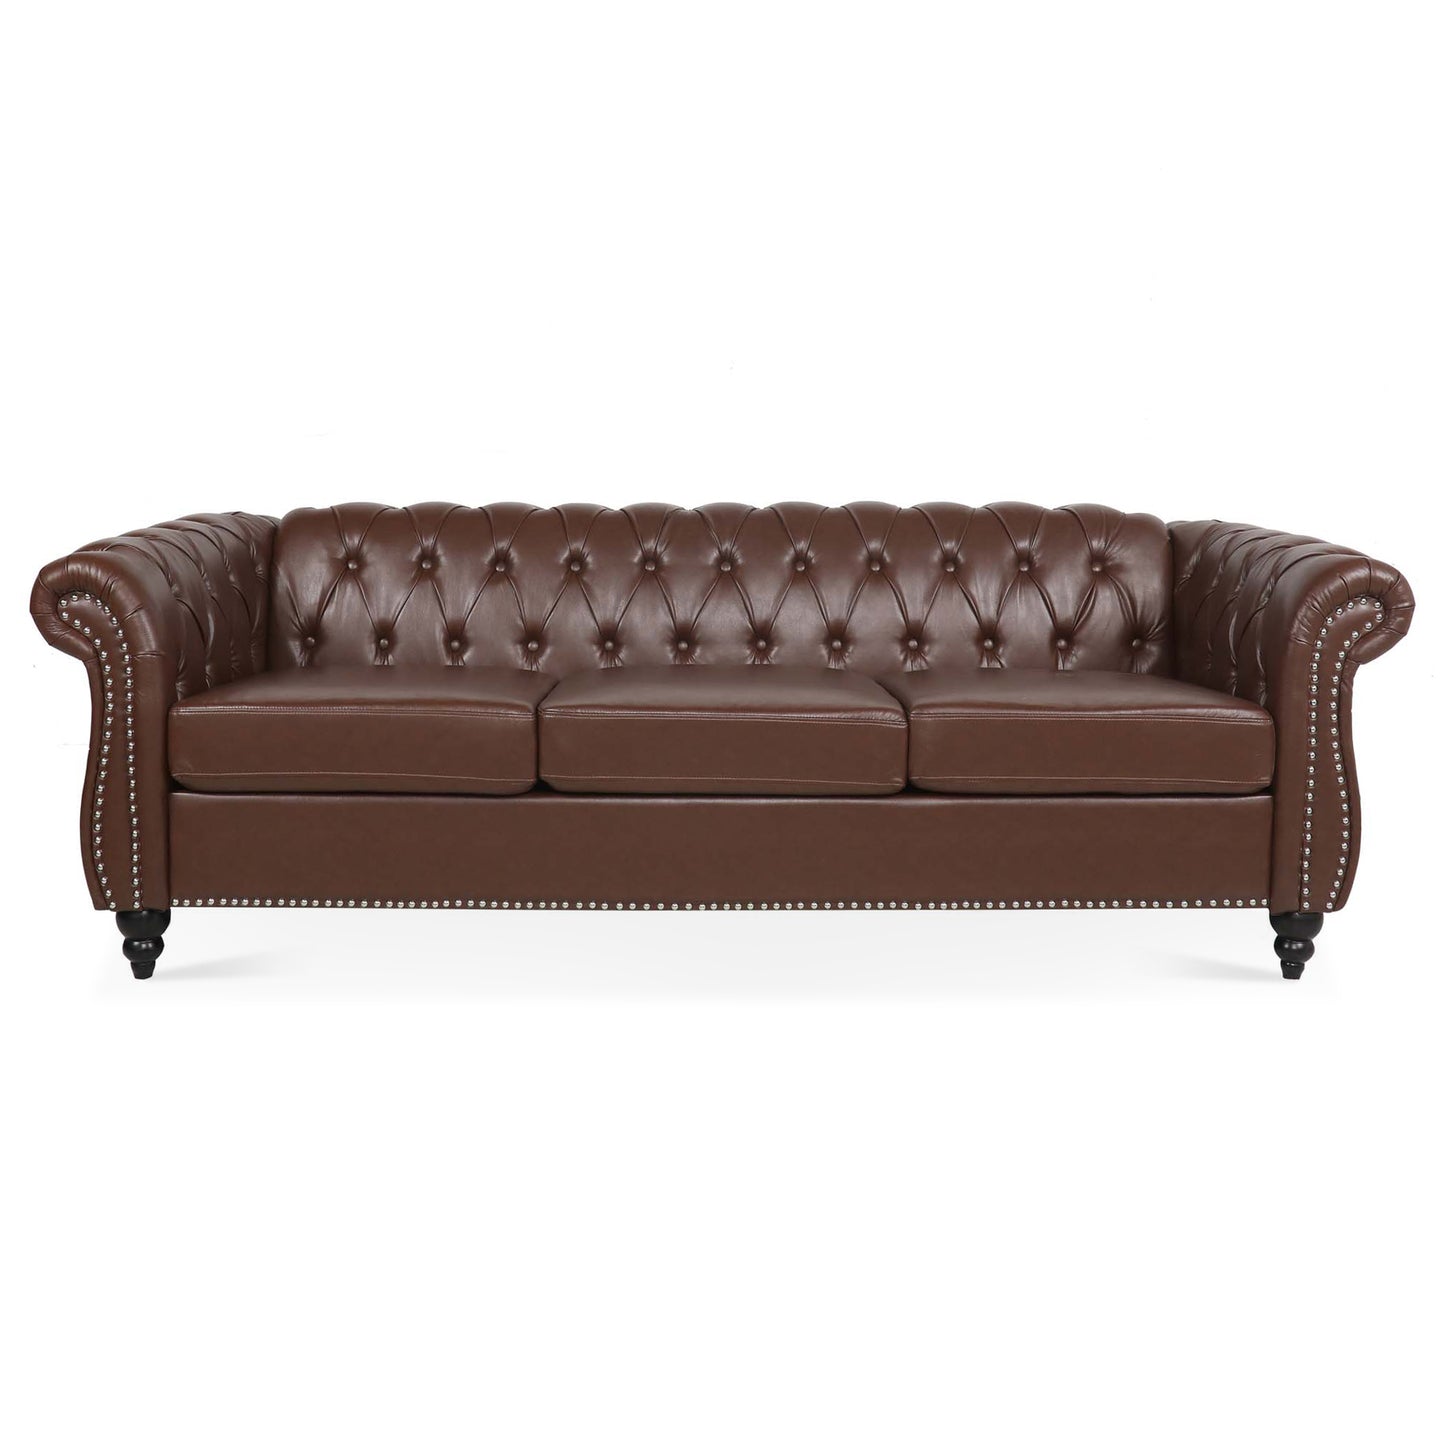 Dark Brown, Vegan Leather, Curved Arm, Chesterfield Inspired, Three Seat Sofa.